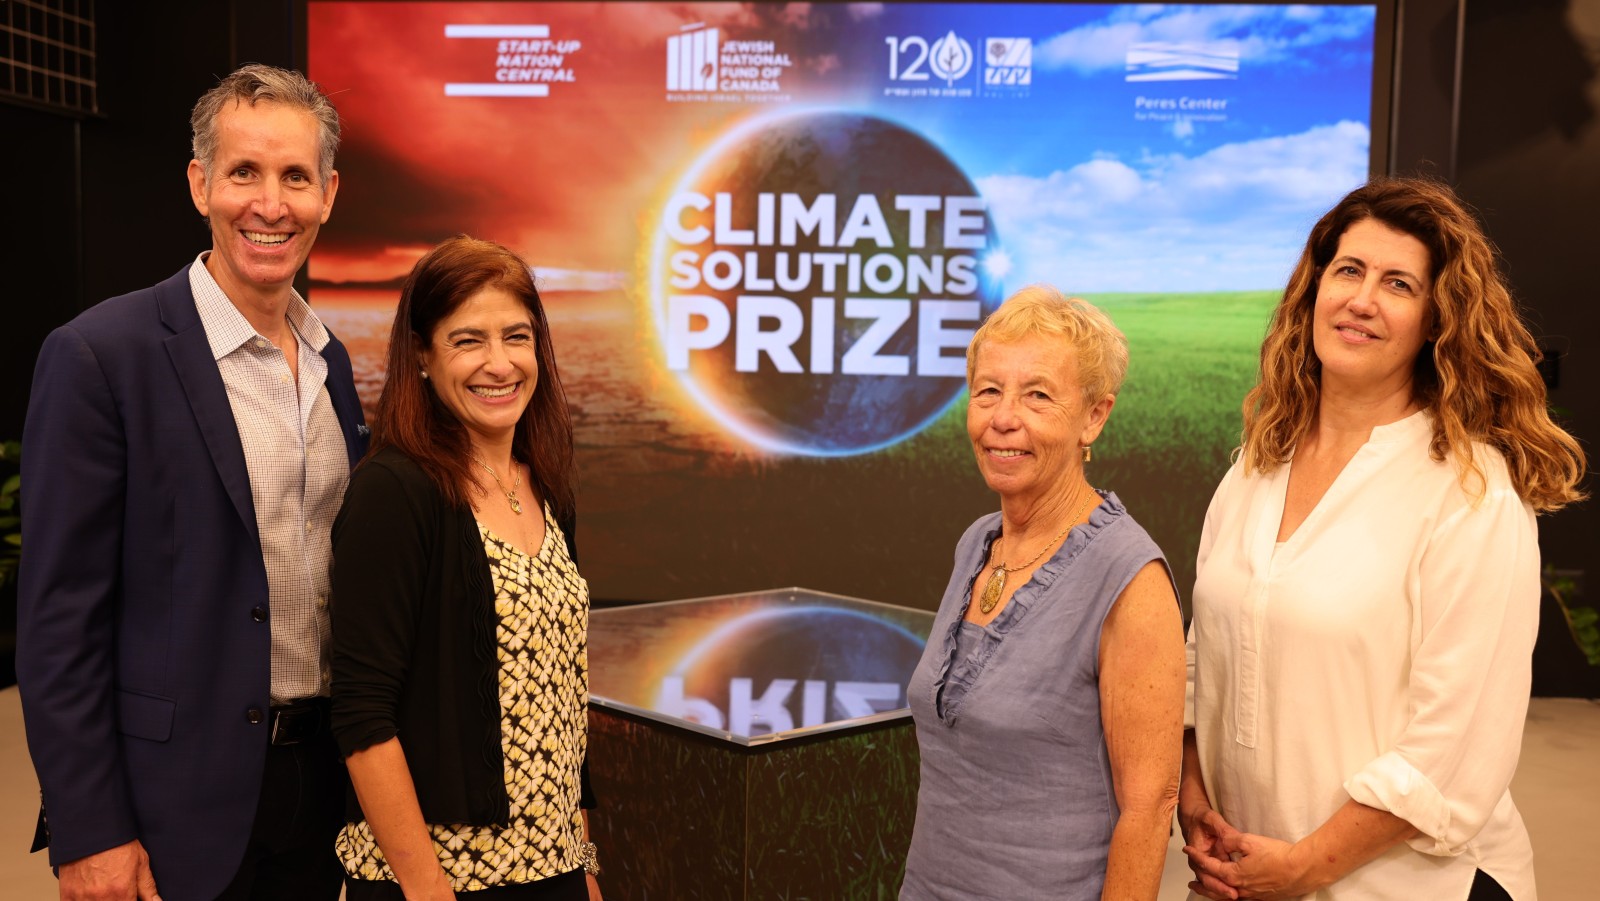 From left, Climate Solutions Prize Executive Chair Jeff Hart; Start-Up Nation Central VP of Philanthropic Partnerships Laura Gilinski; Chair of KKL’s Board Committee for Environment and Science Emily Levy-Shochat; and Efrat Duvdevani, director of the Peres Center for Peace and Innovation. Photo by Eyal Marilus